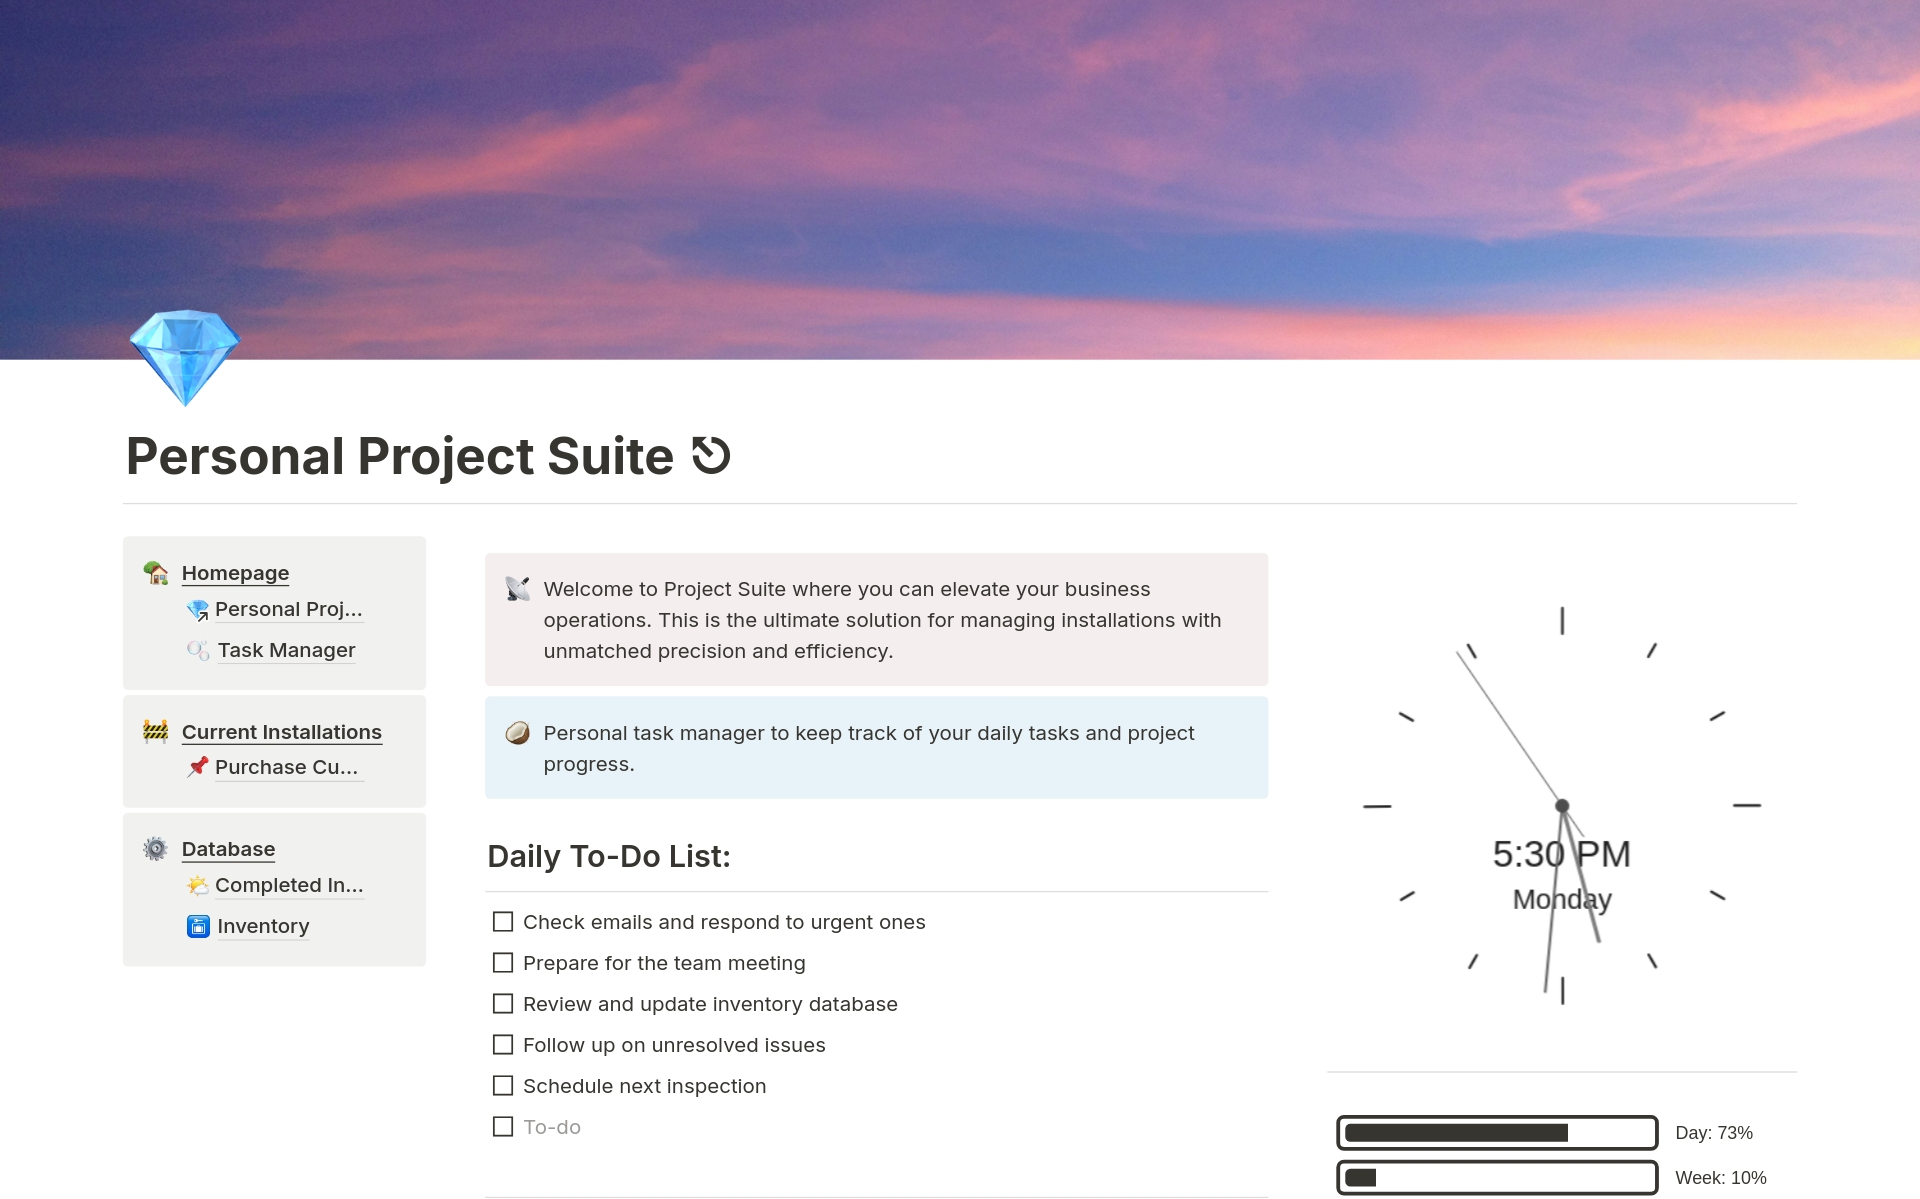 Personal Project Suite is designed to streamline your personal workflow, keeping everything organized